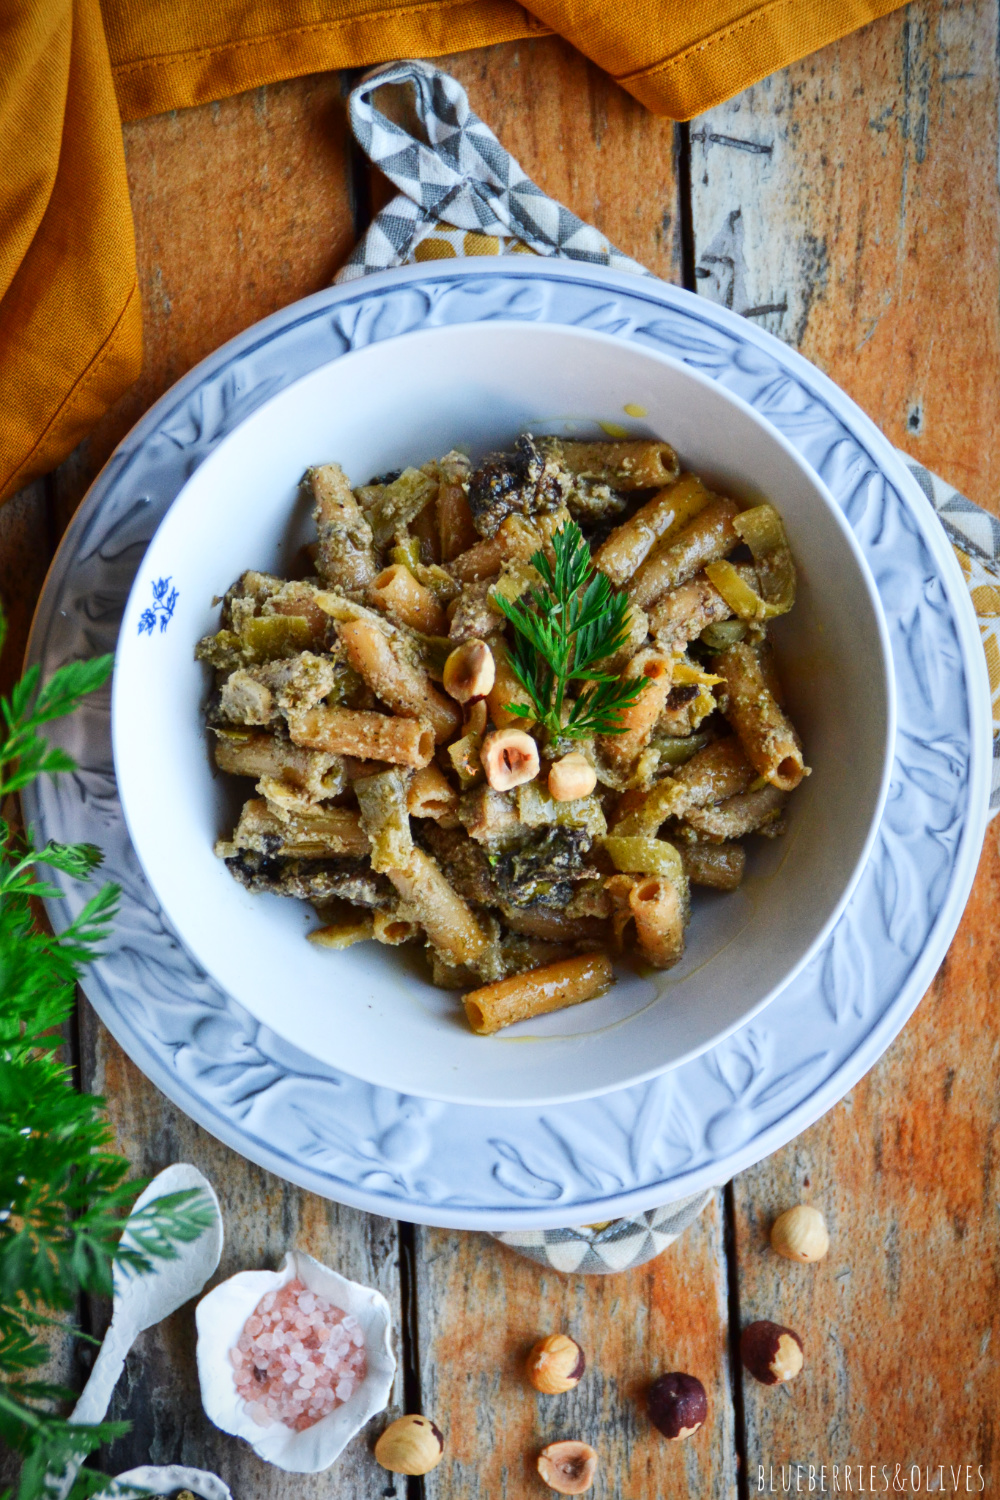 WHITE AND BLUE BOWL OF PASTA WITH FENNEL PESTO AND OLD WOODEN BACKGROUND, YELLOW TABLECLOTH